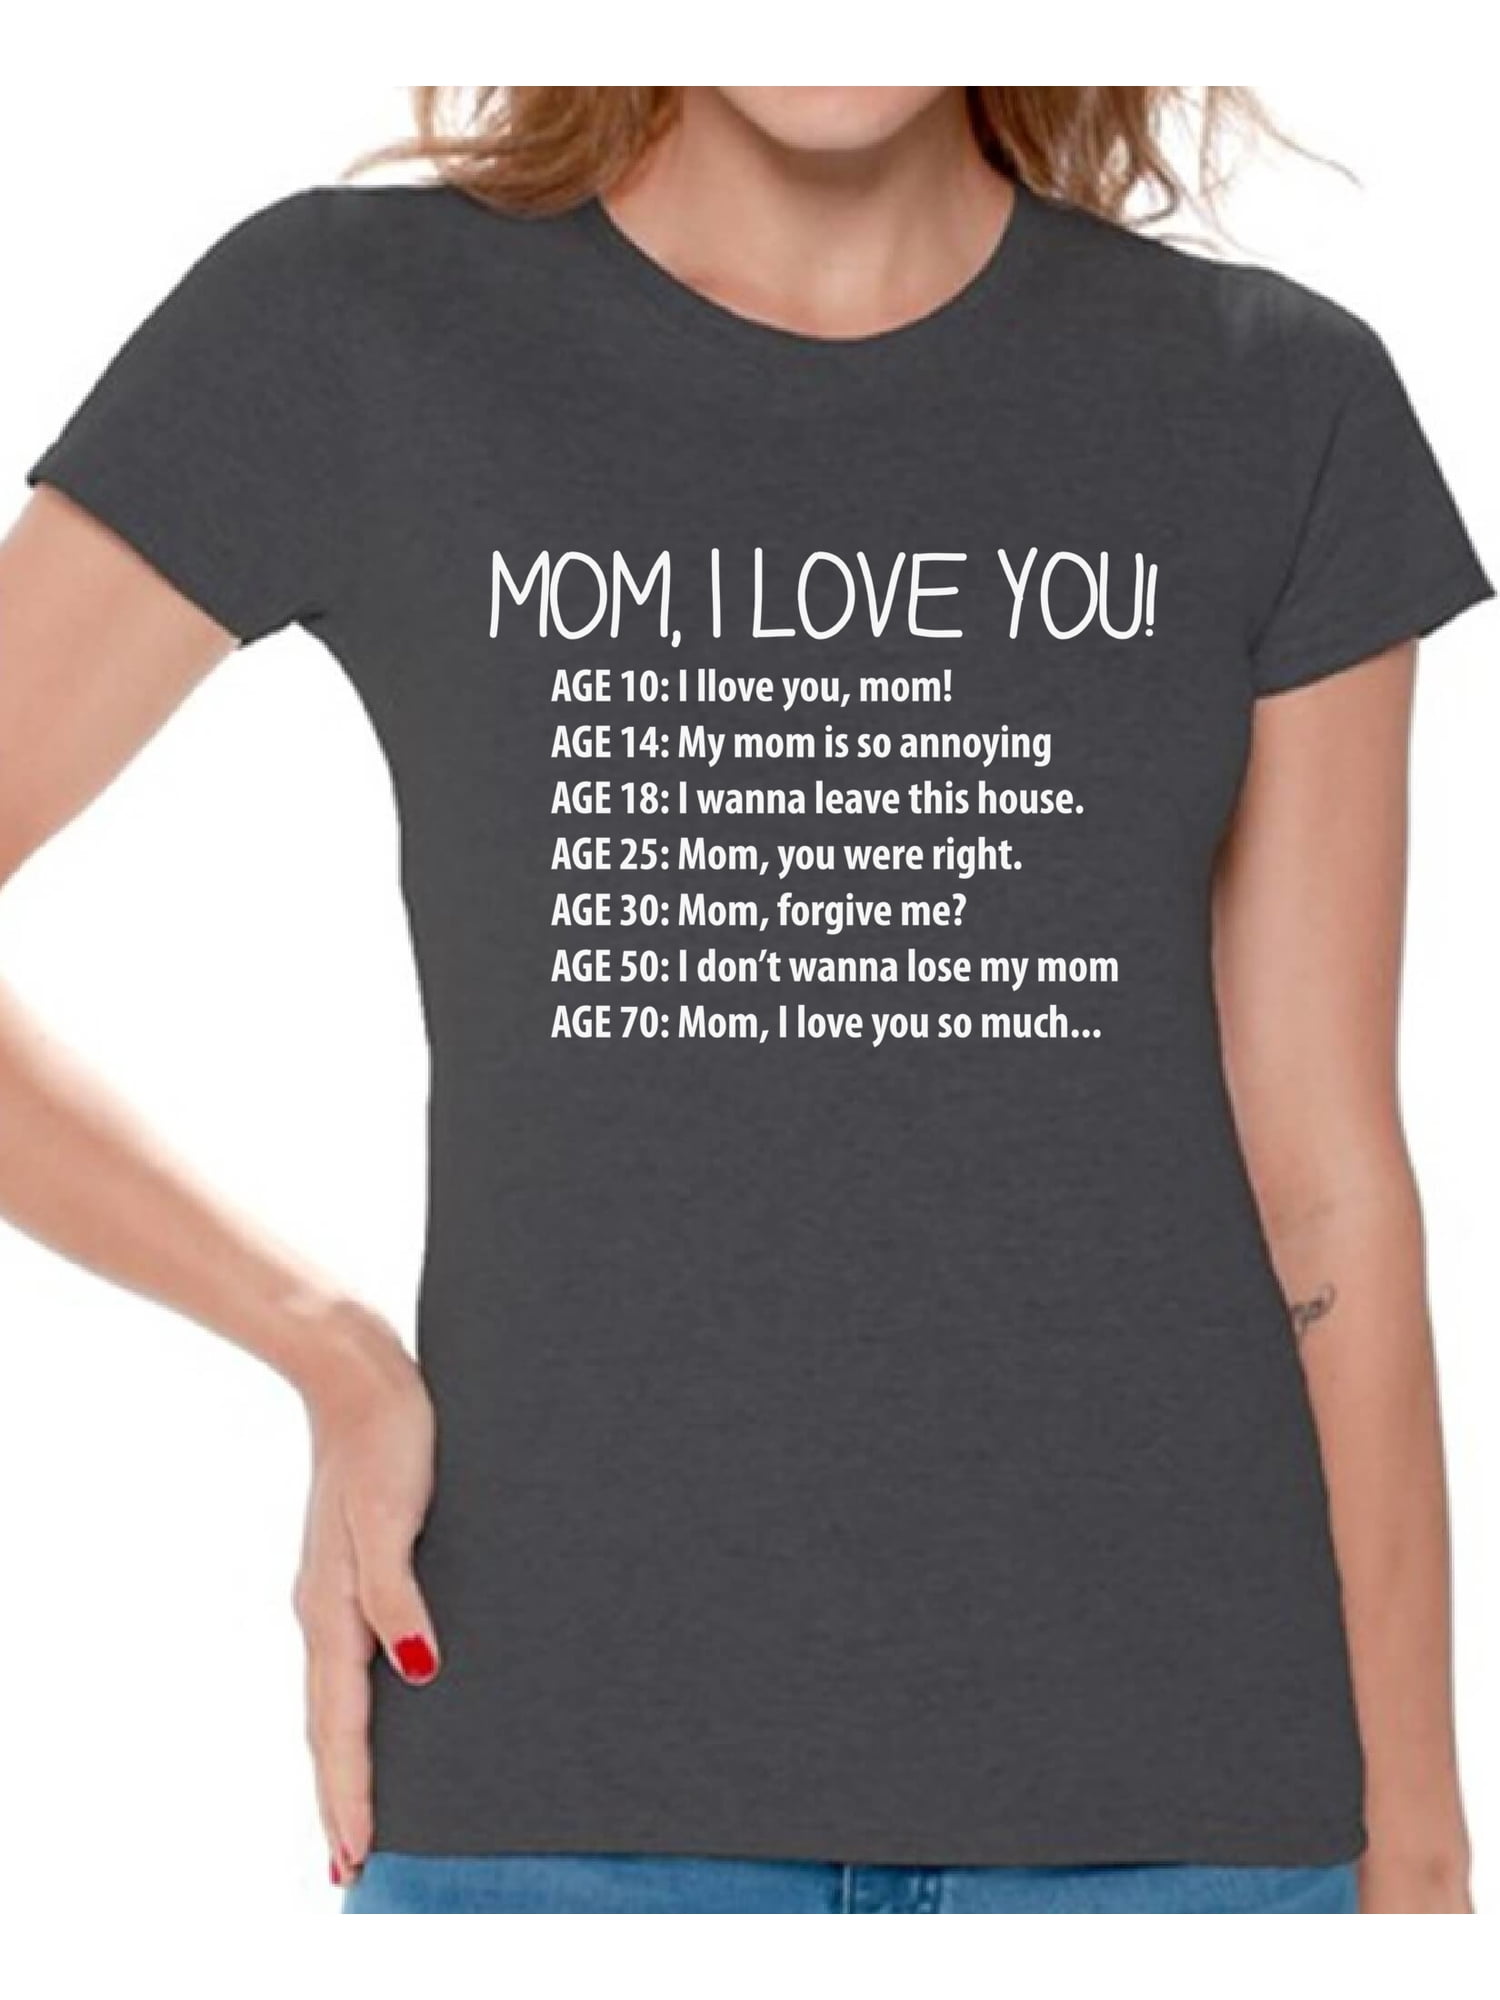 Mothers Day Gift Ideas Gift for Mom Mother's Day Gift Soccer Mom Gift for Mother Gift for Her Strong Women Mom life shirt